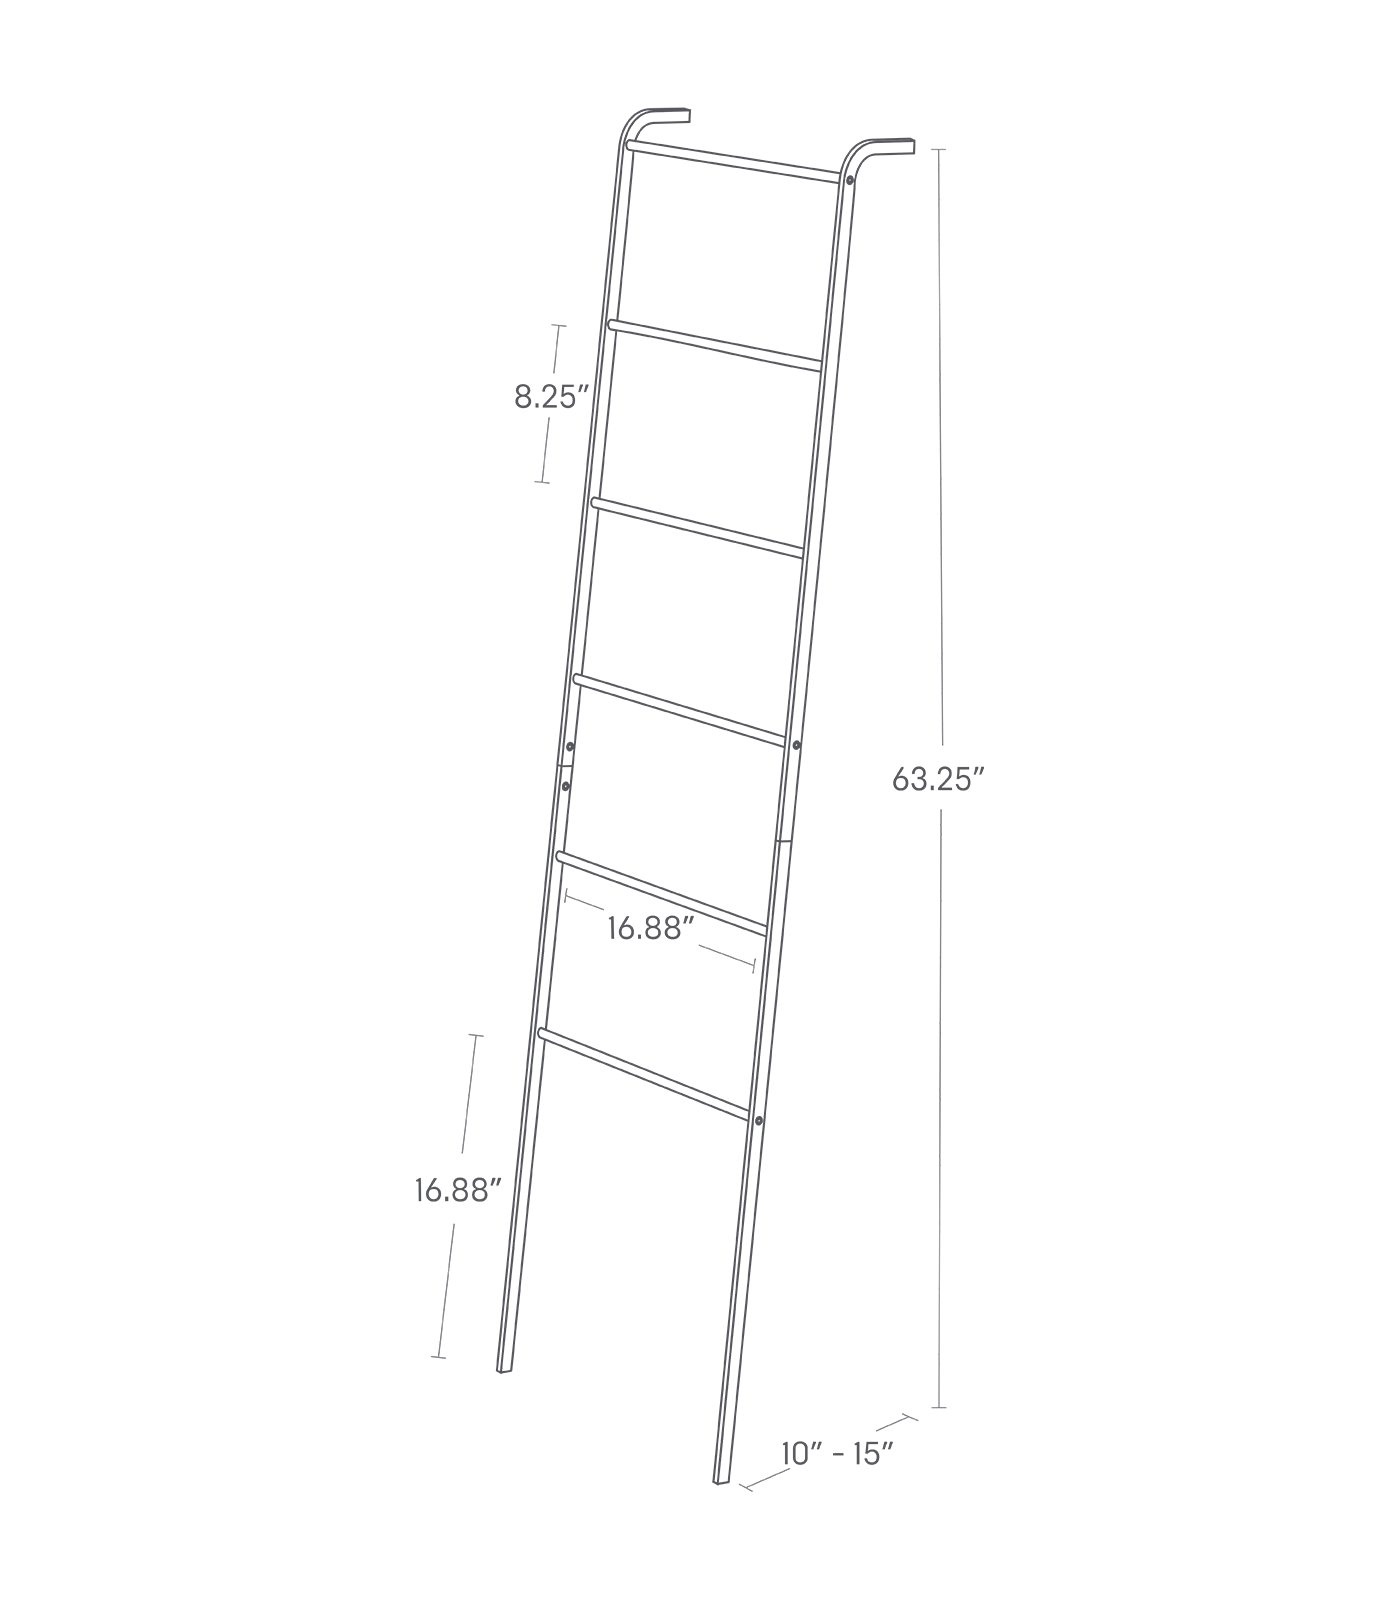 Leaning Storage Ladder - Two Styles (63